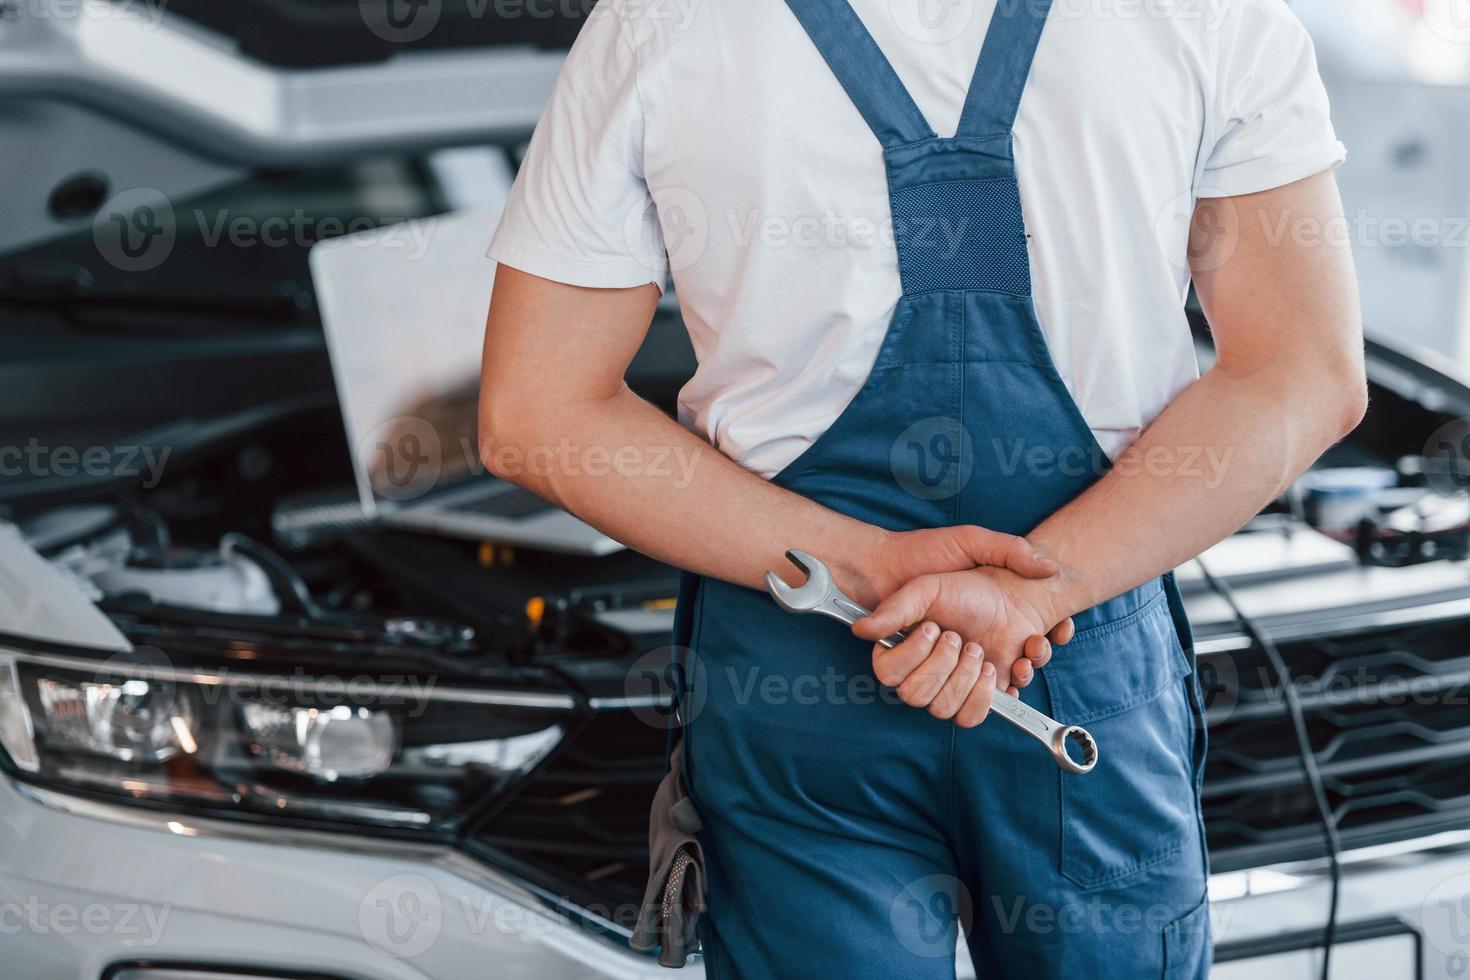 Uses laptop. Young man in white shirt and blue uniform repairs automobile photo